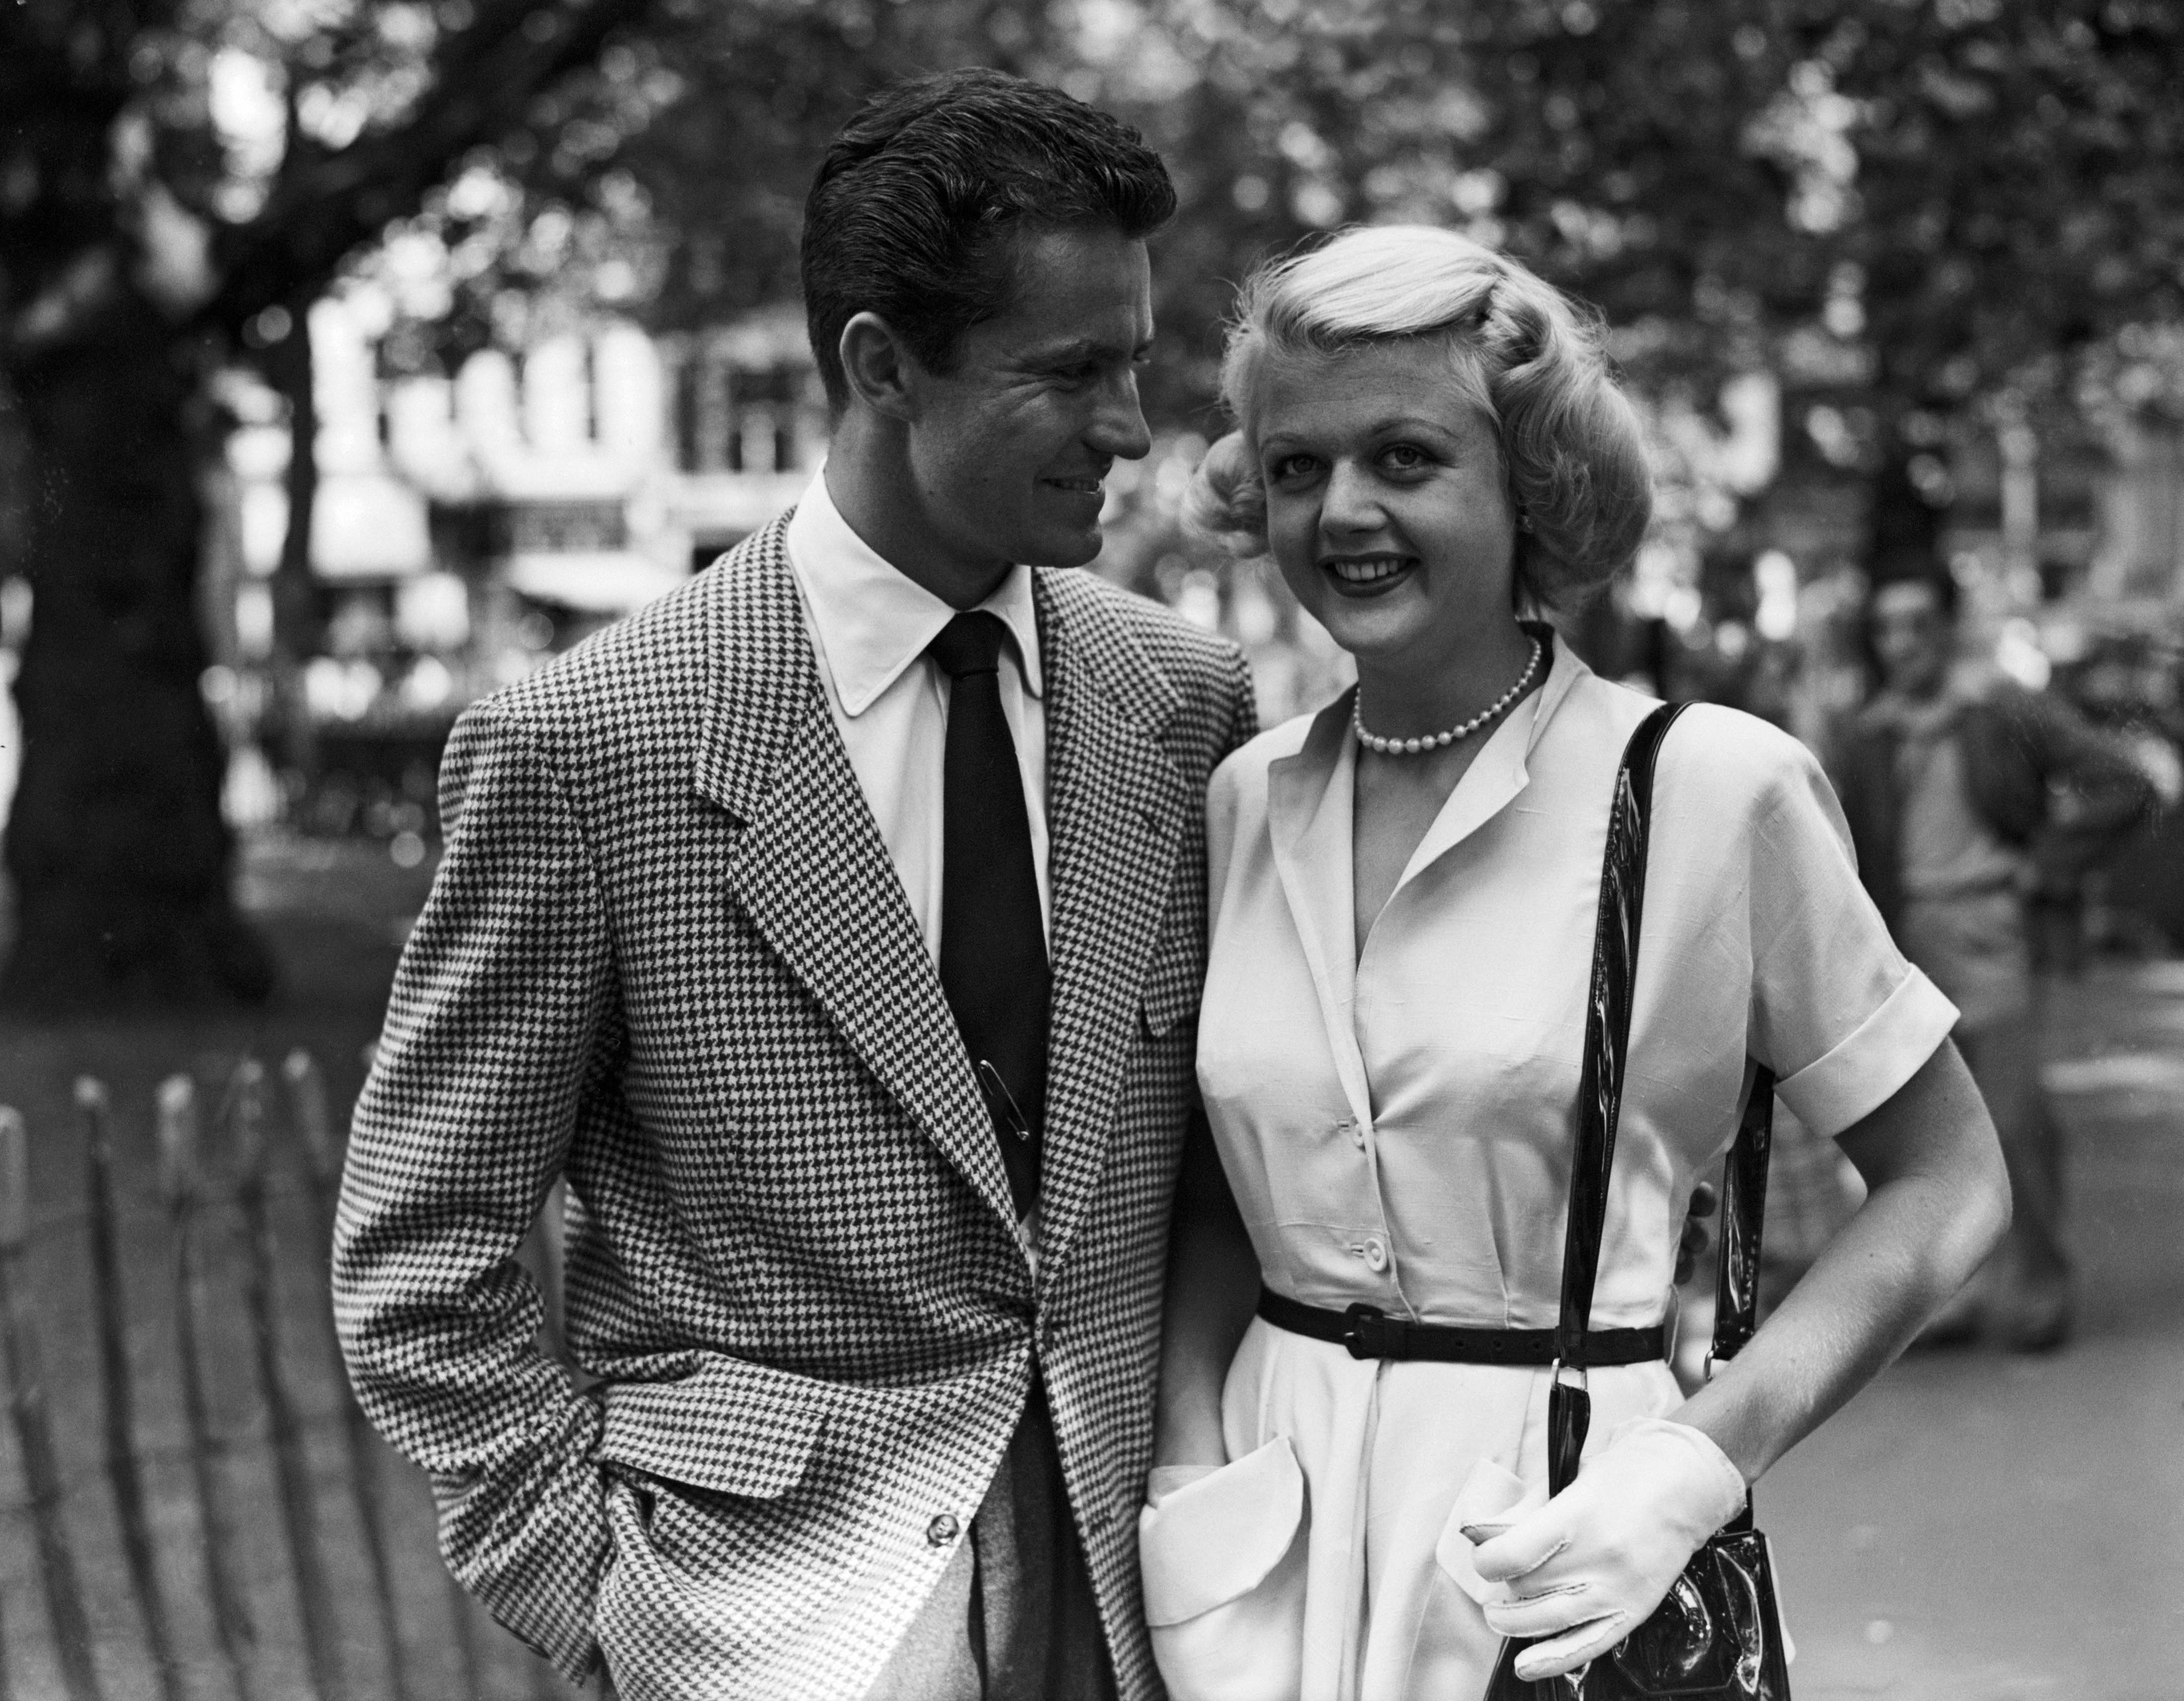 Angela Lanbury and her husband Peter Shaw on their wedding day in London 1949. | Source: Getty Images